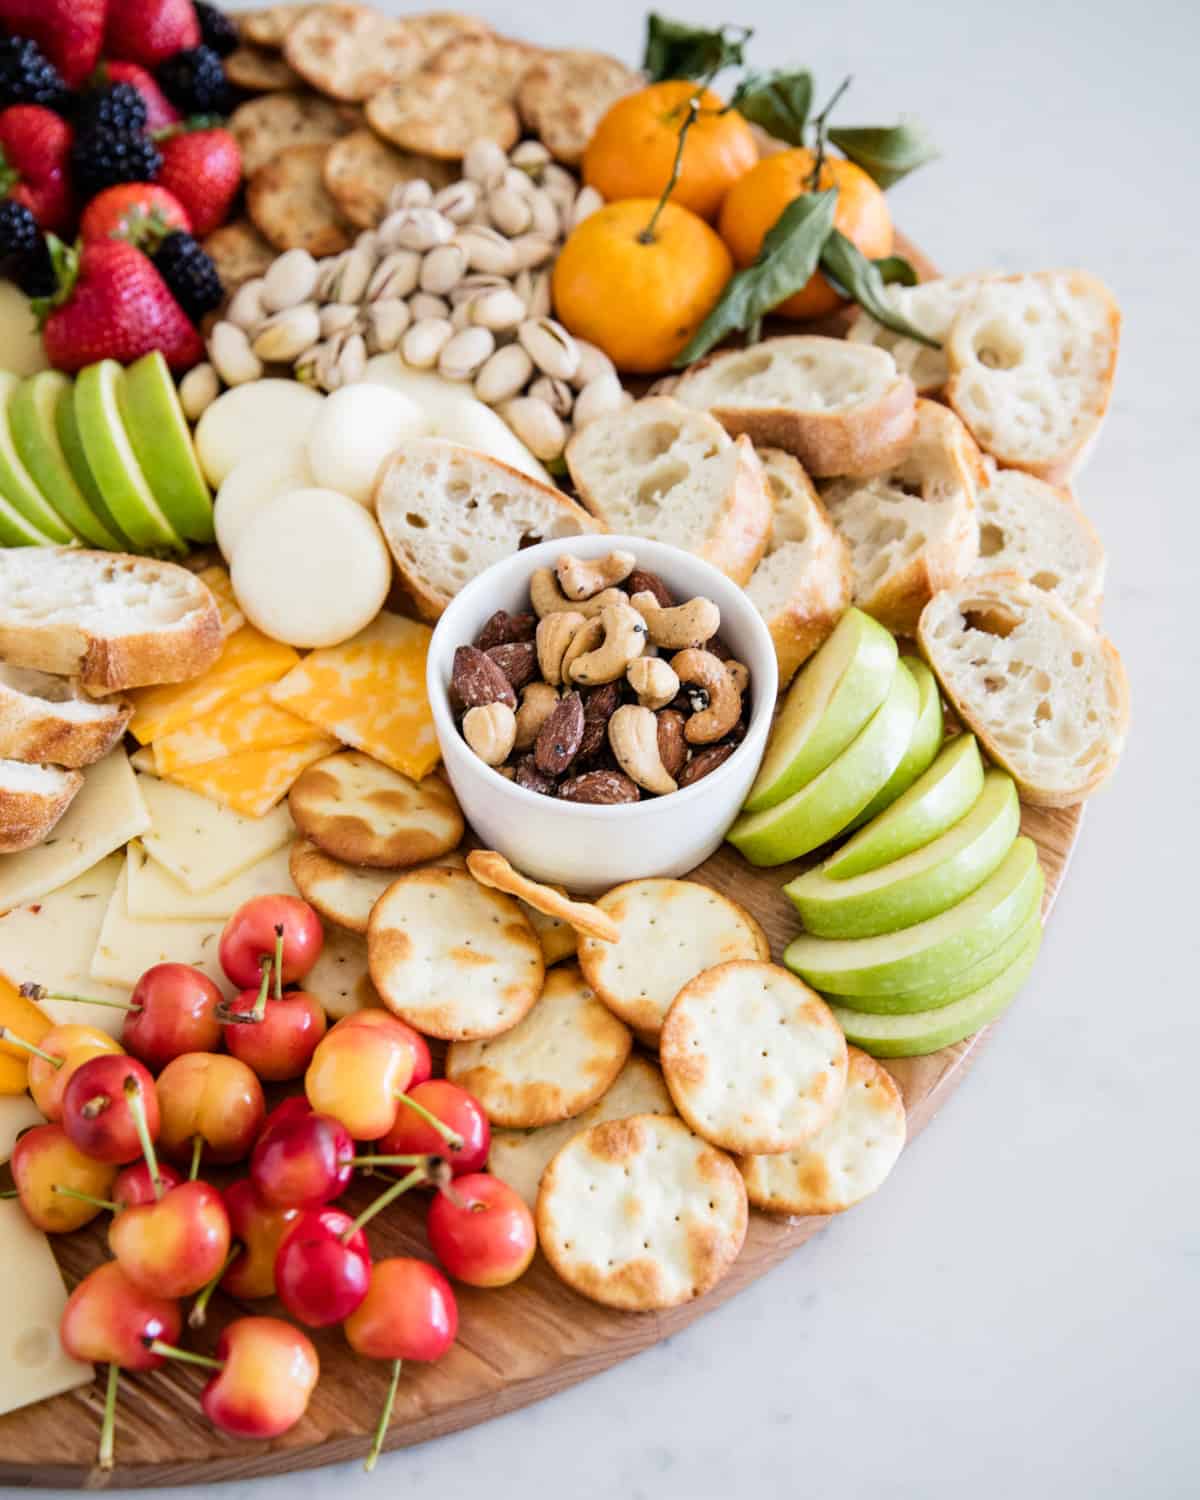 Nuts, fruit, cheese, and crackers are on board.